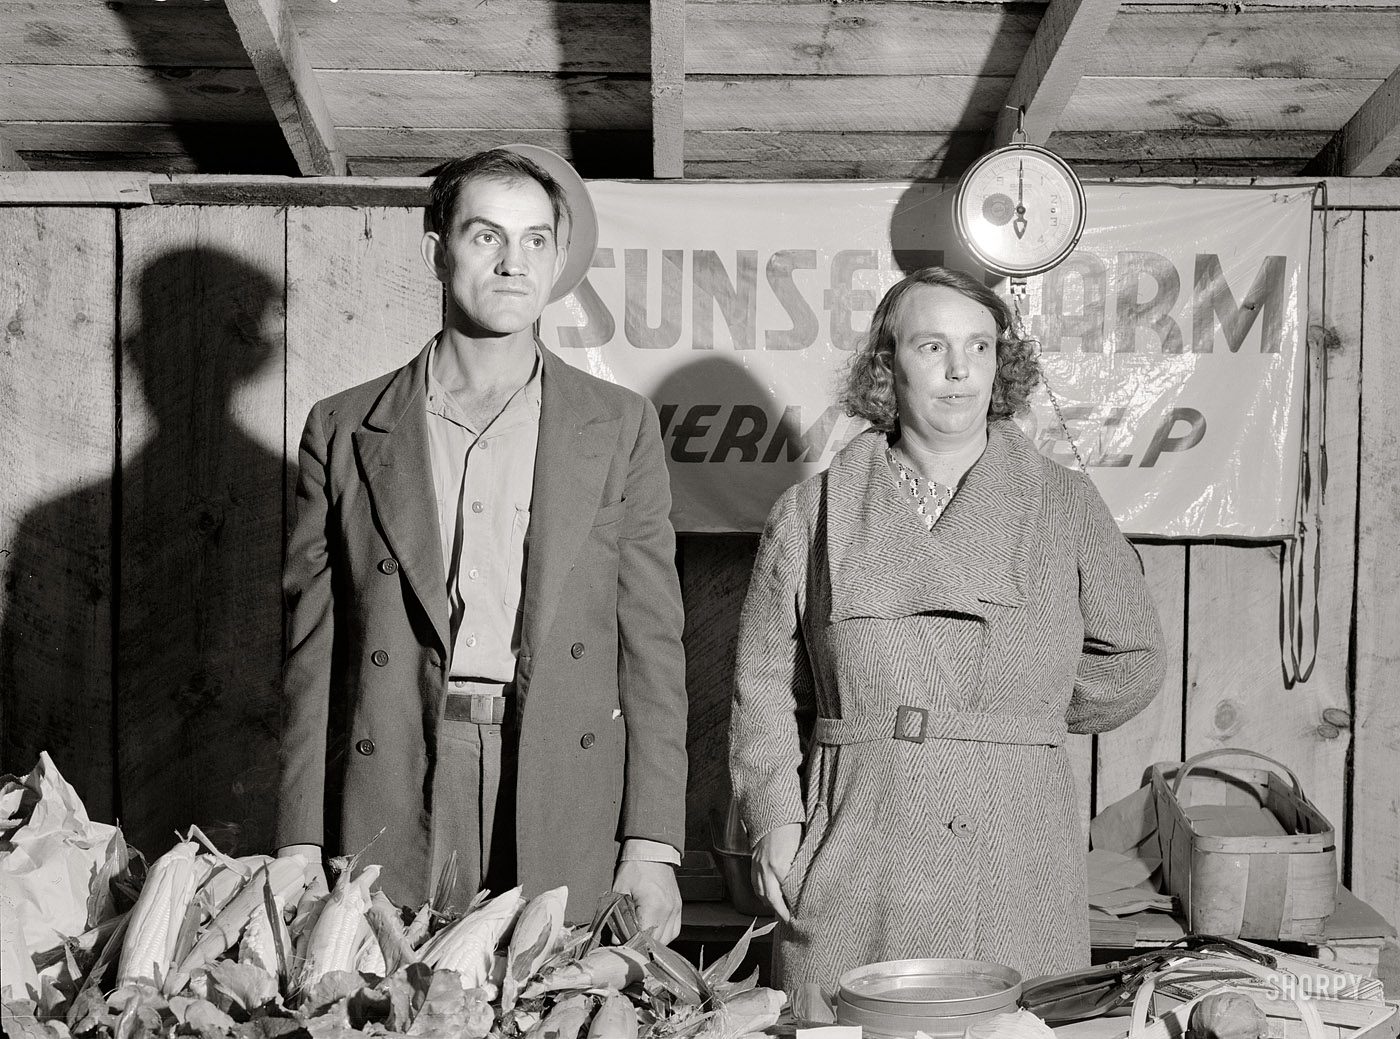 August 1940. Du Bois, Pennsylvania. "Farmer and wife at the Tri-County Farmers Co-op Market." Medium-format safety negative by Jack Delano. View full size.